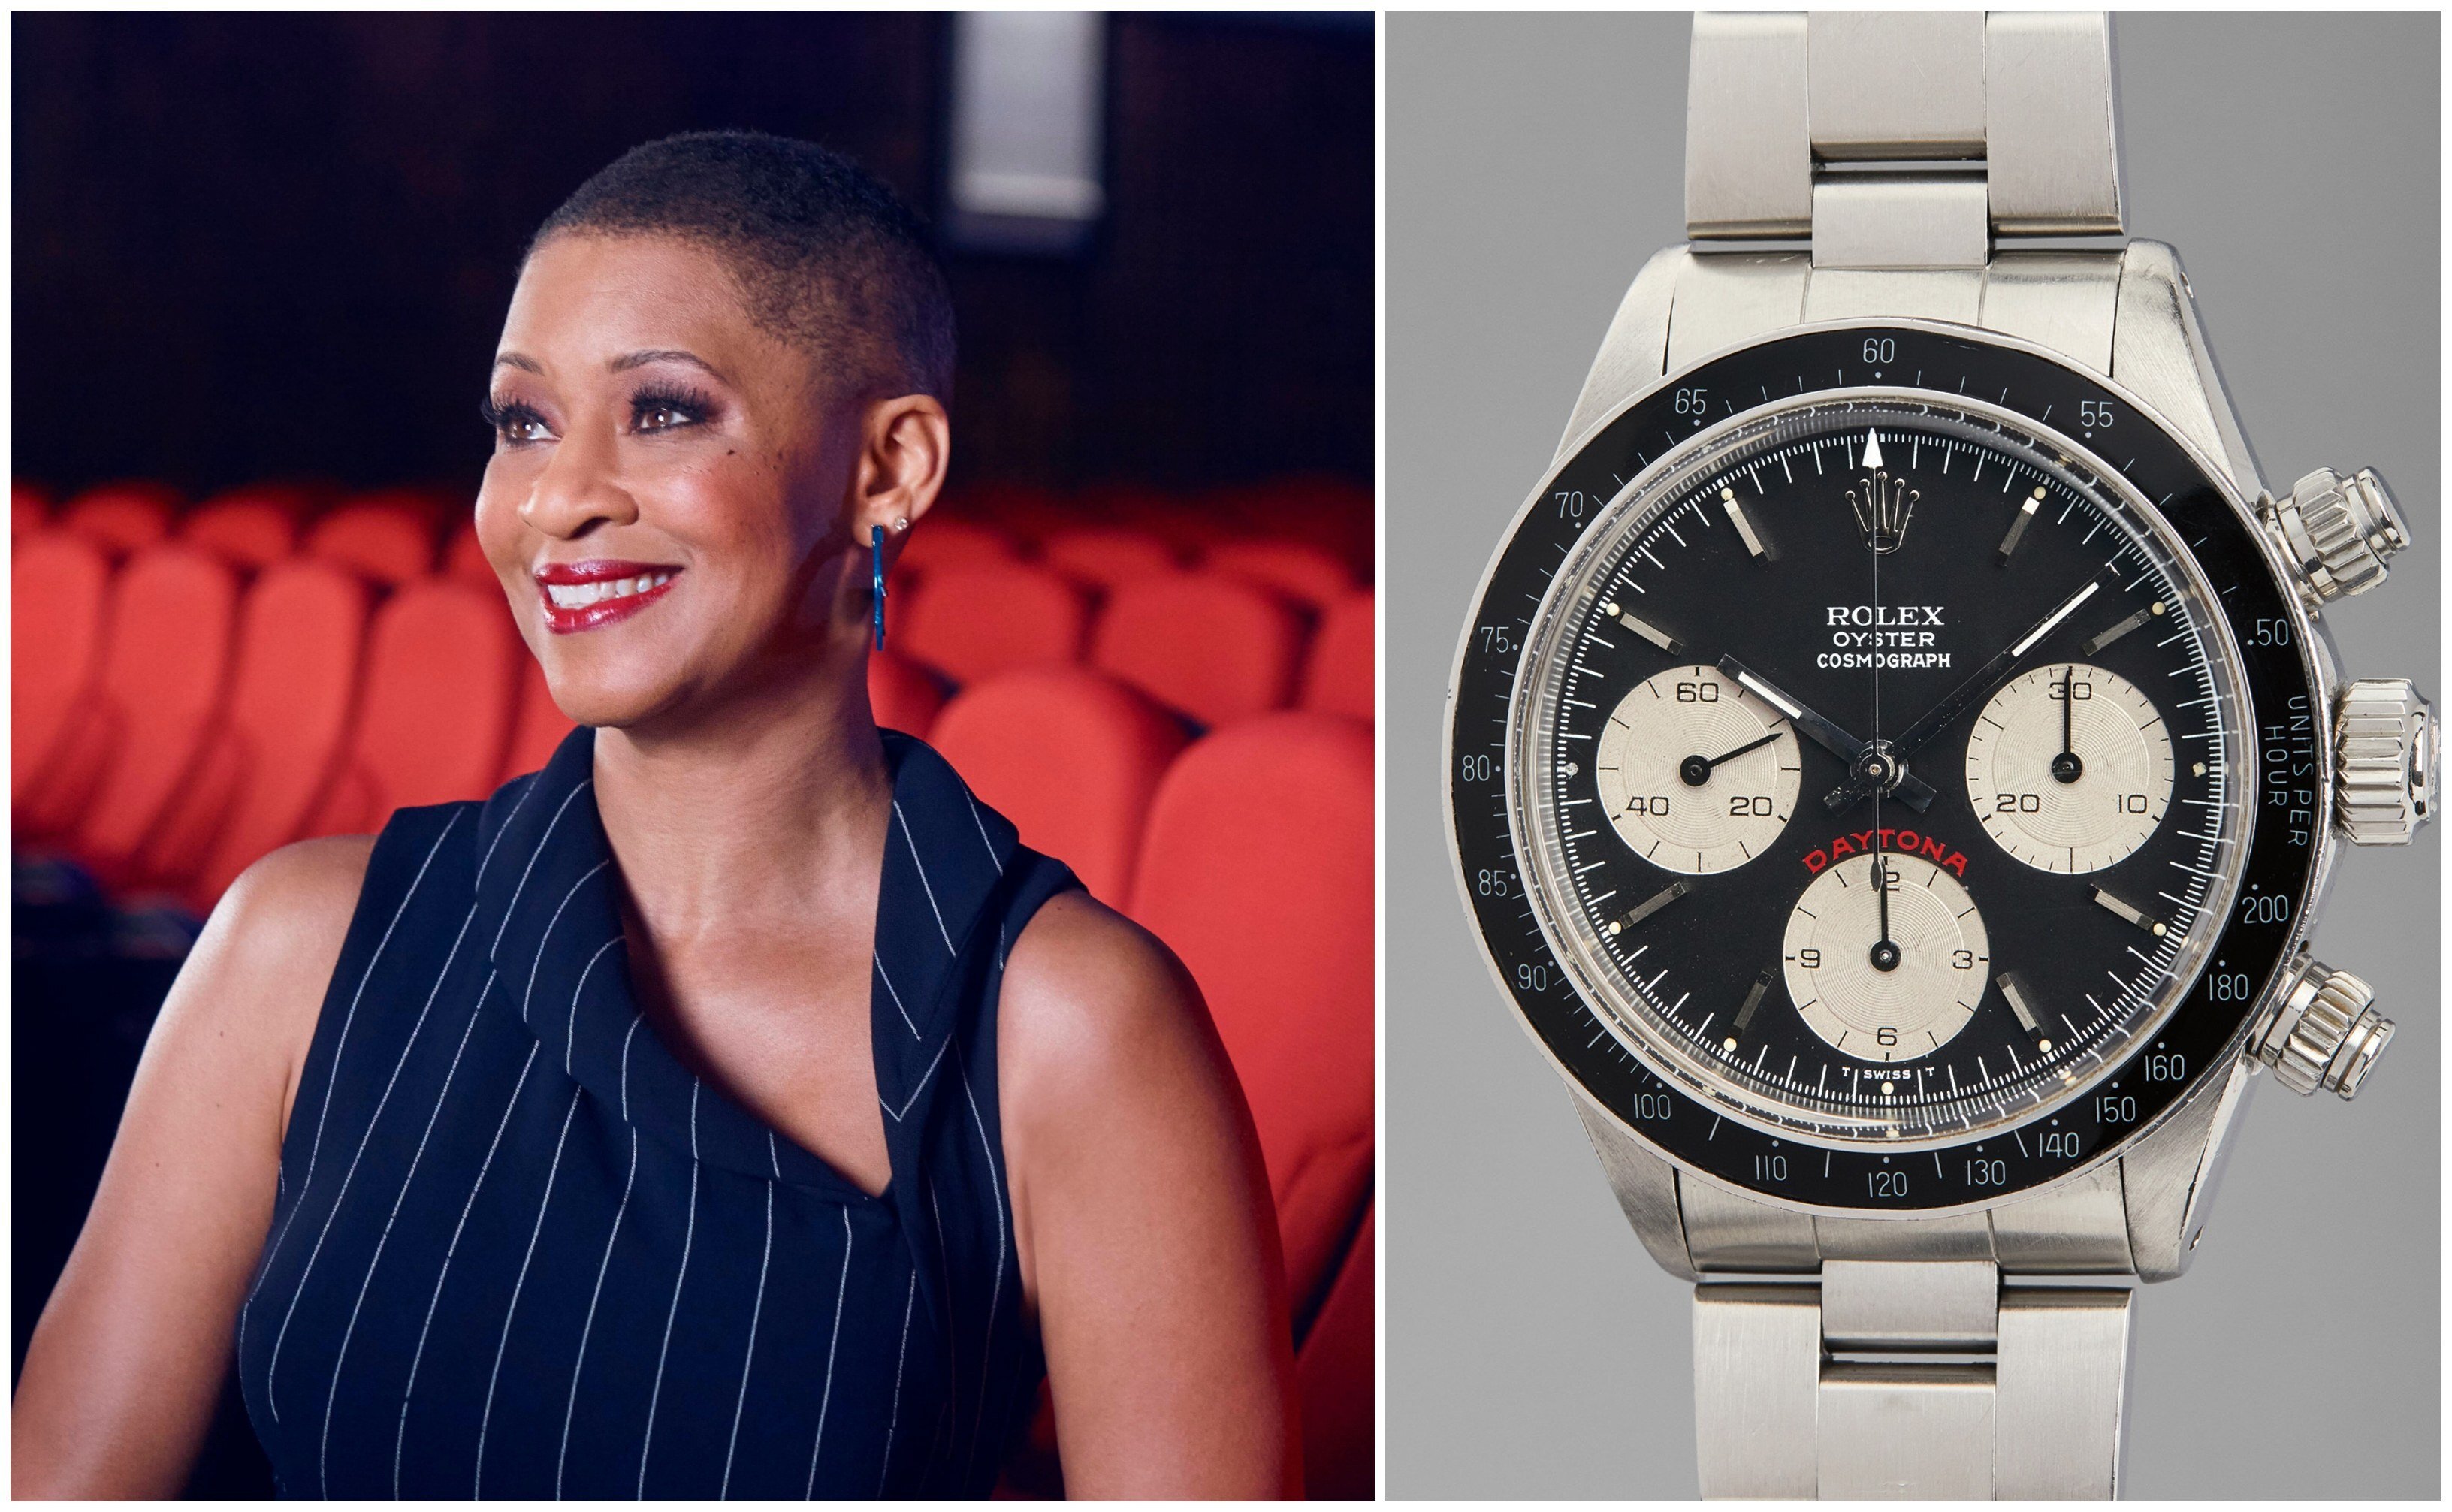 The ‘Paul Newman Rolex’ which the actor wore for decades, including the 1983 Academy Awards when he was nominated for Best Actor for The Verdict, is on display at the Academy Museum of Motion Pictures in Los Angeles. Photos: Handout